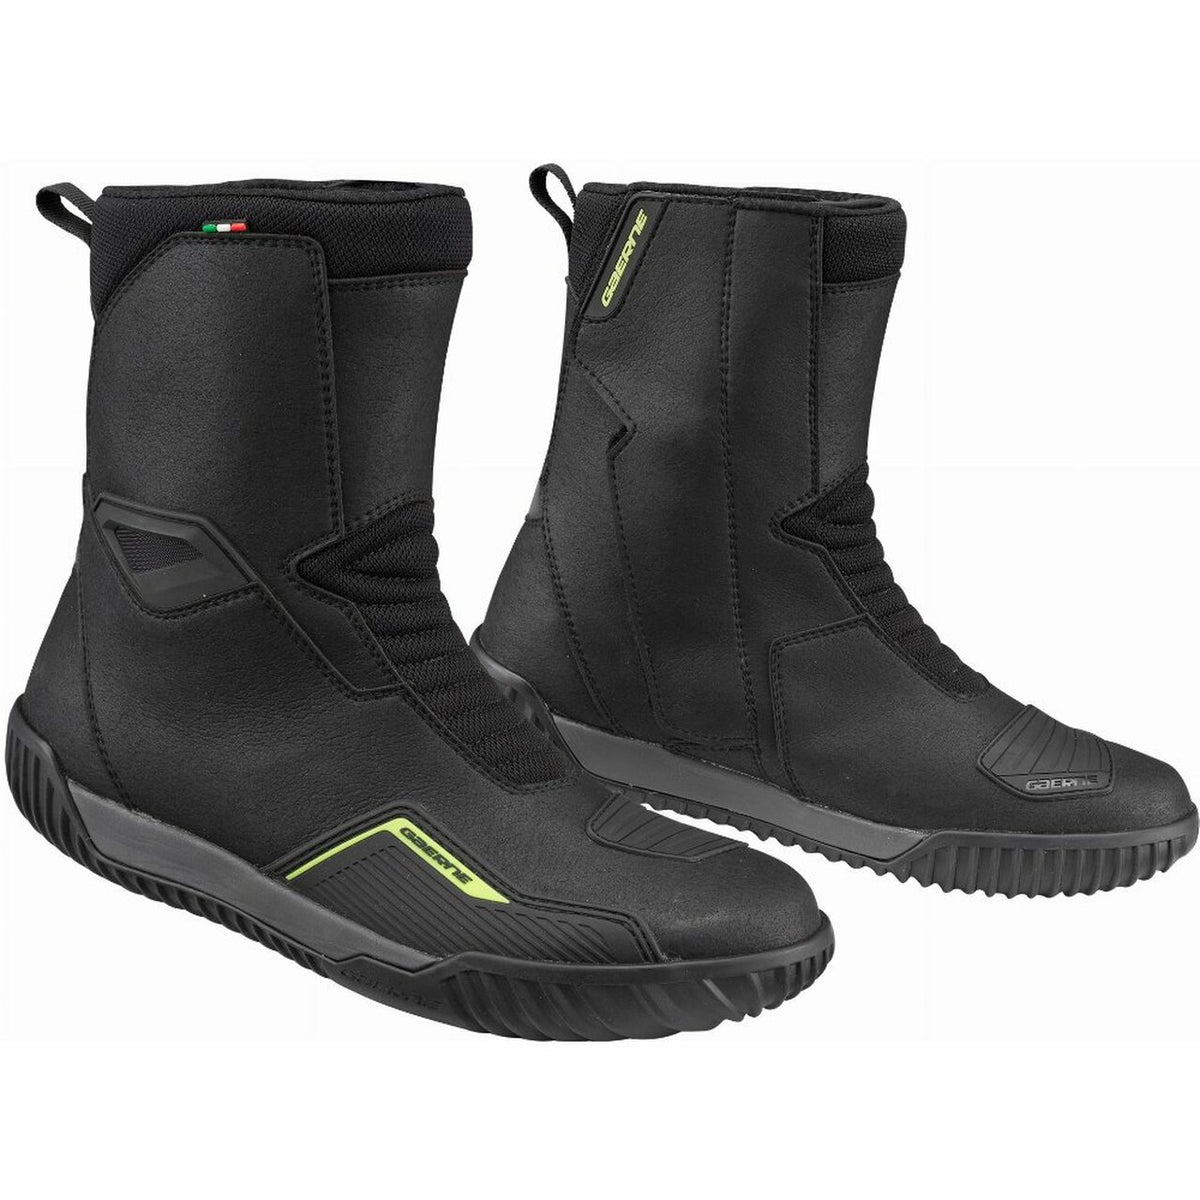 Gaerne Escape Touring Boots